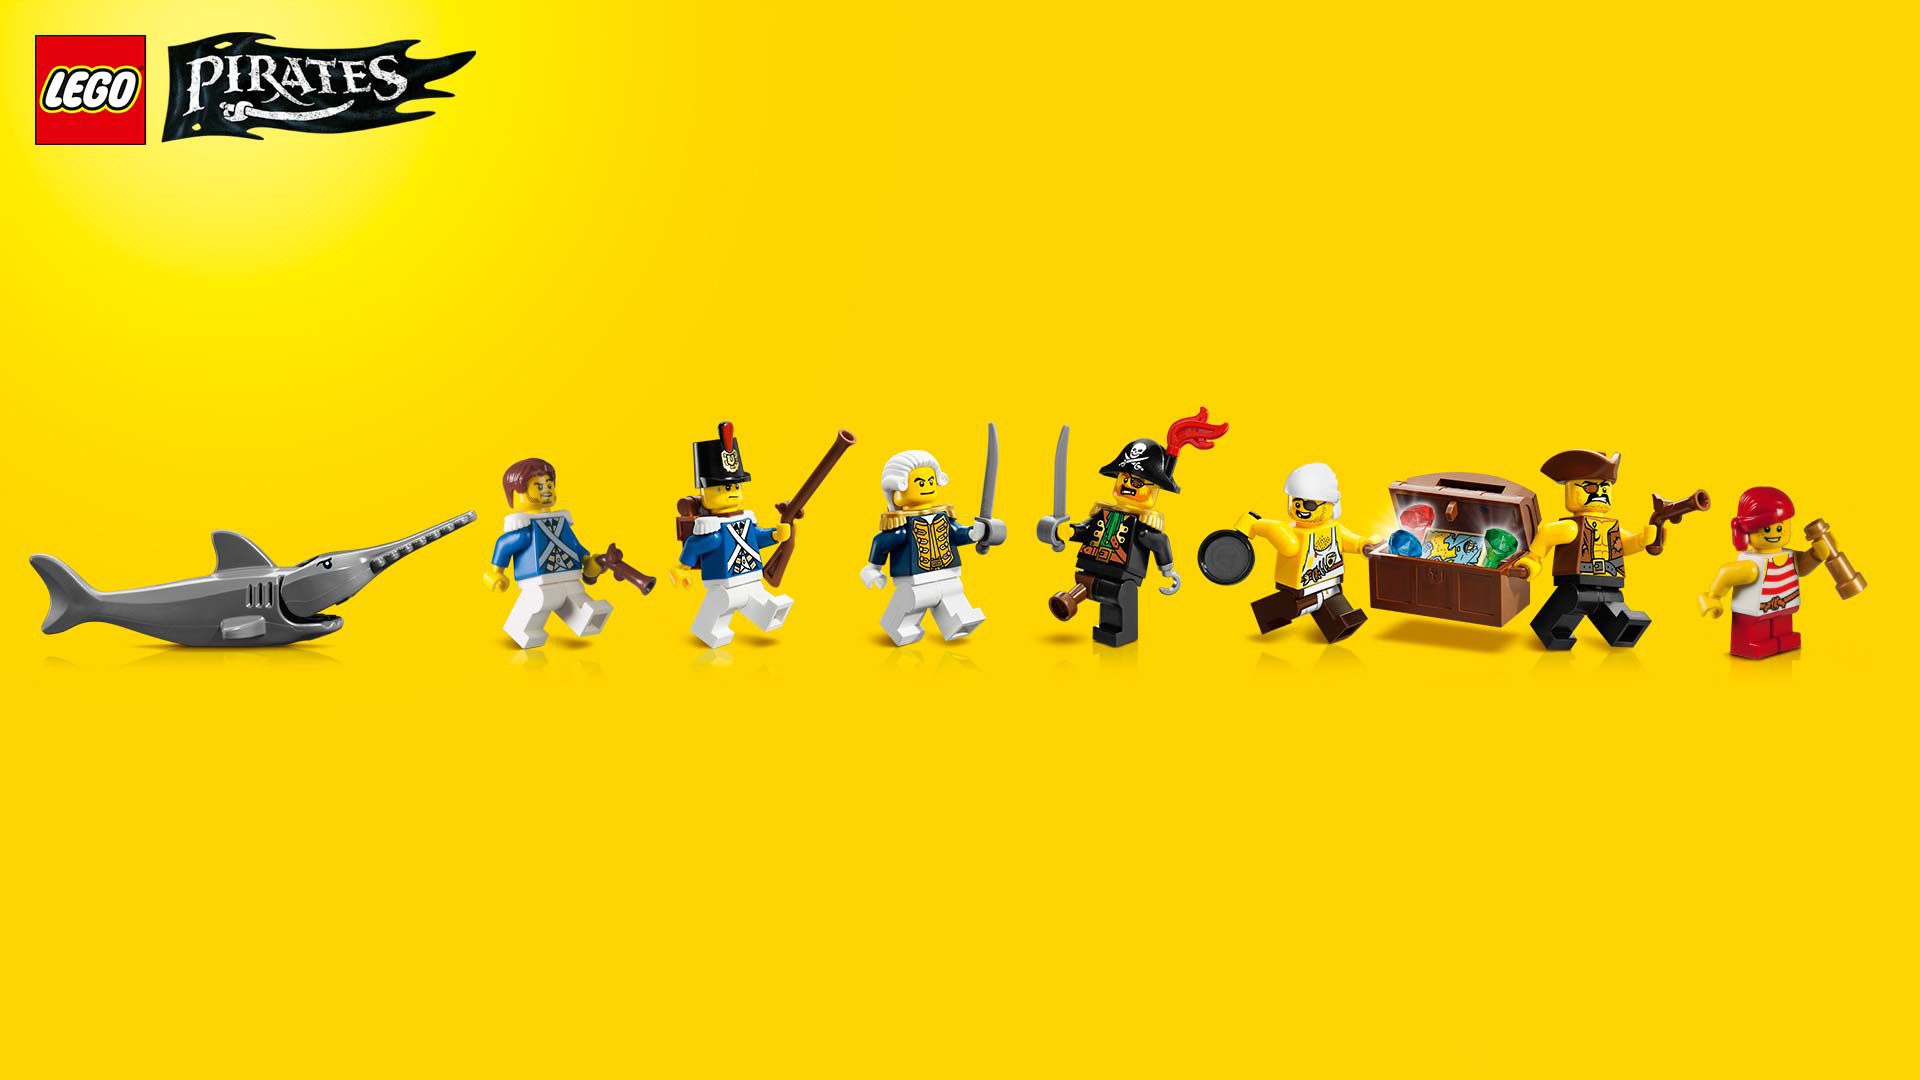 1920x1080, Pirates And Soldiers Wallpaper Lego Preview - Lego Backgrounds -  1920x1080 Wallpaper 